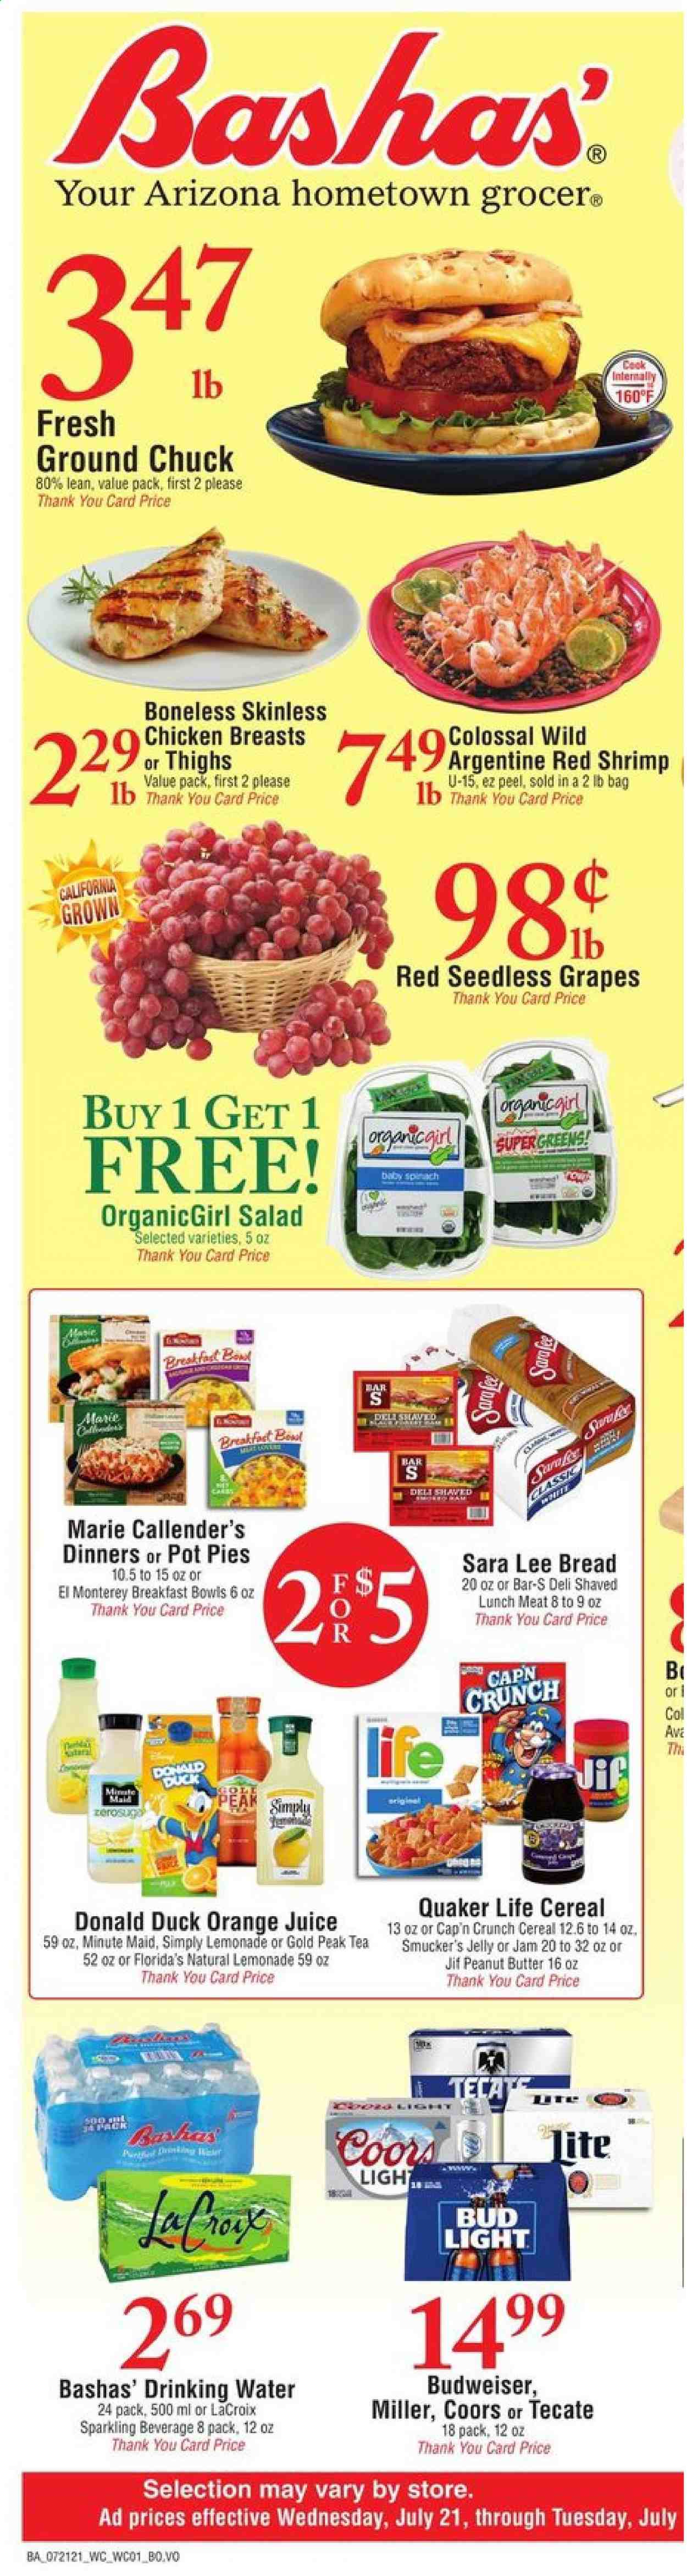 thumbnail - Bashas' Flyer - 07/21/2021 - 07/27/2021 - Sales products - seedless grapes, bread, Sara Lee, pot pie, spinach, salad, grapes, shrimps, Quaker, Marie Callender's, lunch meat, jelly, Florida's Natural, cereals, Cap'n Crunch, fruit jam, peanut butter, Jif, lemonade, orange juice, juice, Gold Peak Tea, fruit punch, tea, beer, Budweiser, Coors, Bud Light, Miller, chicken breasts, ground chuck. Page 1.